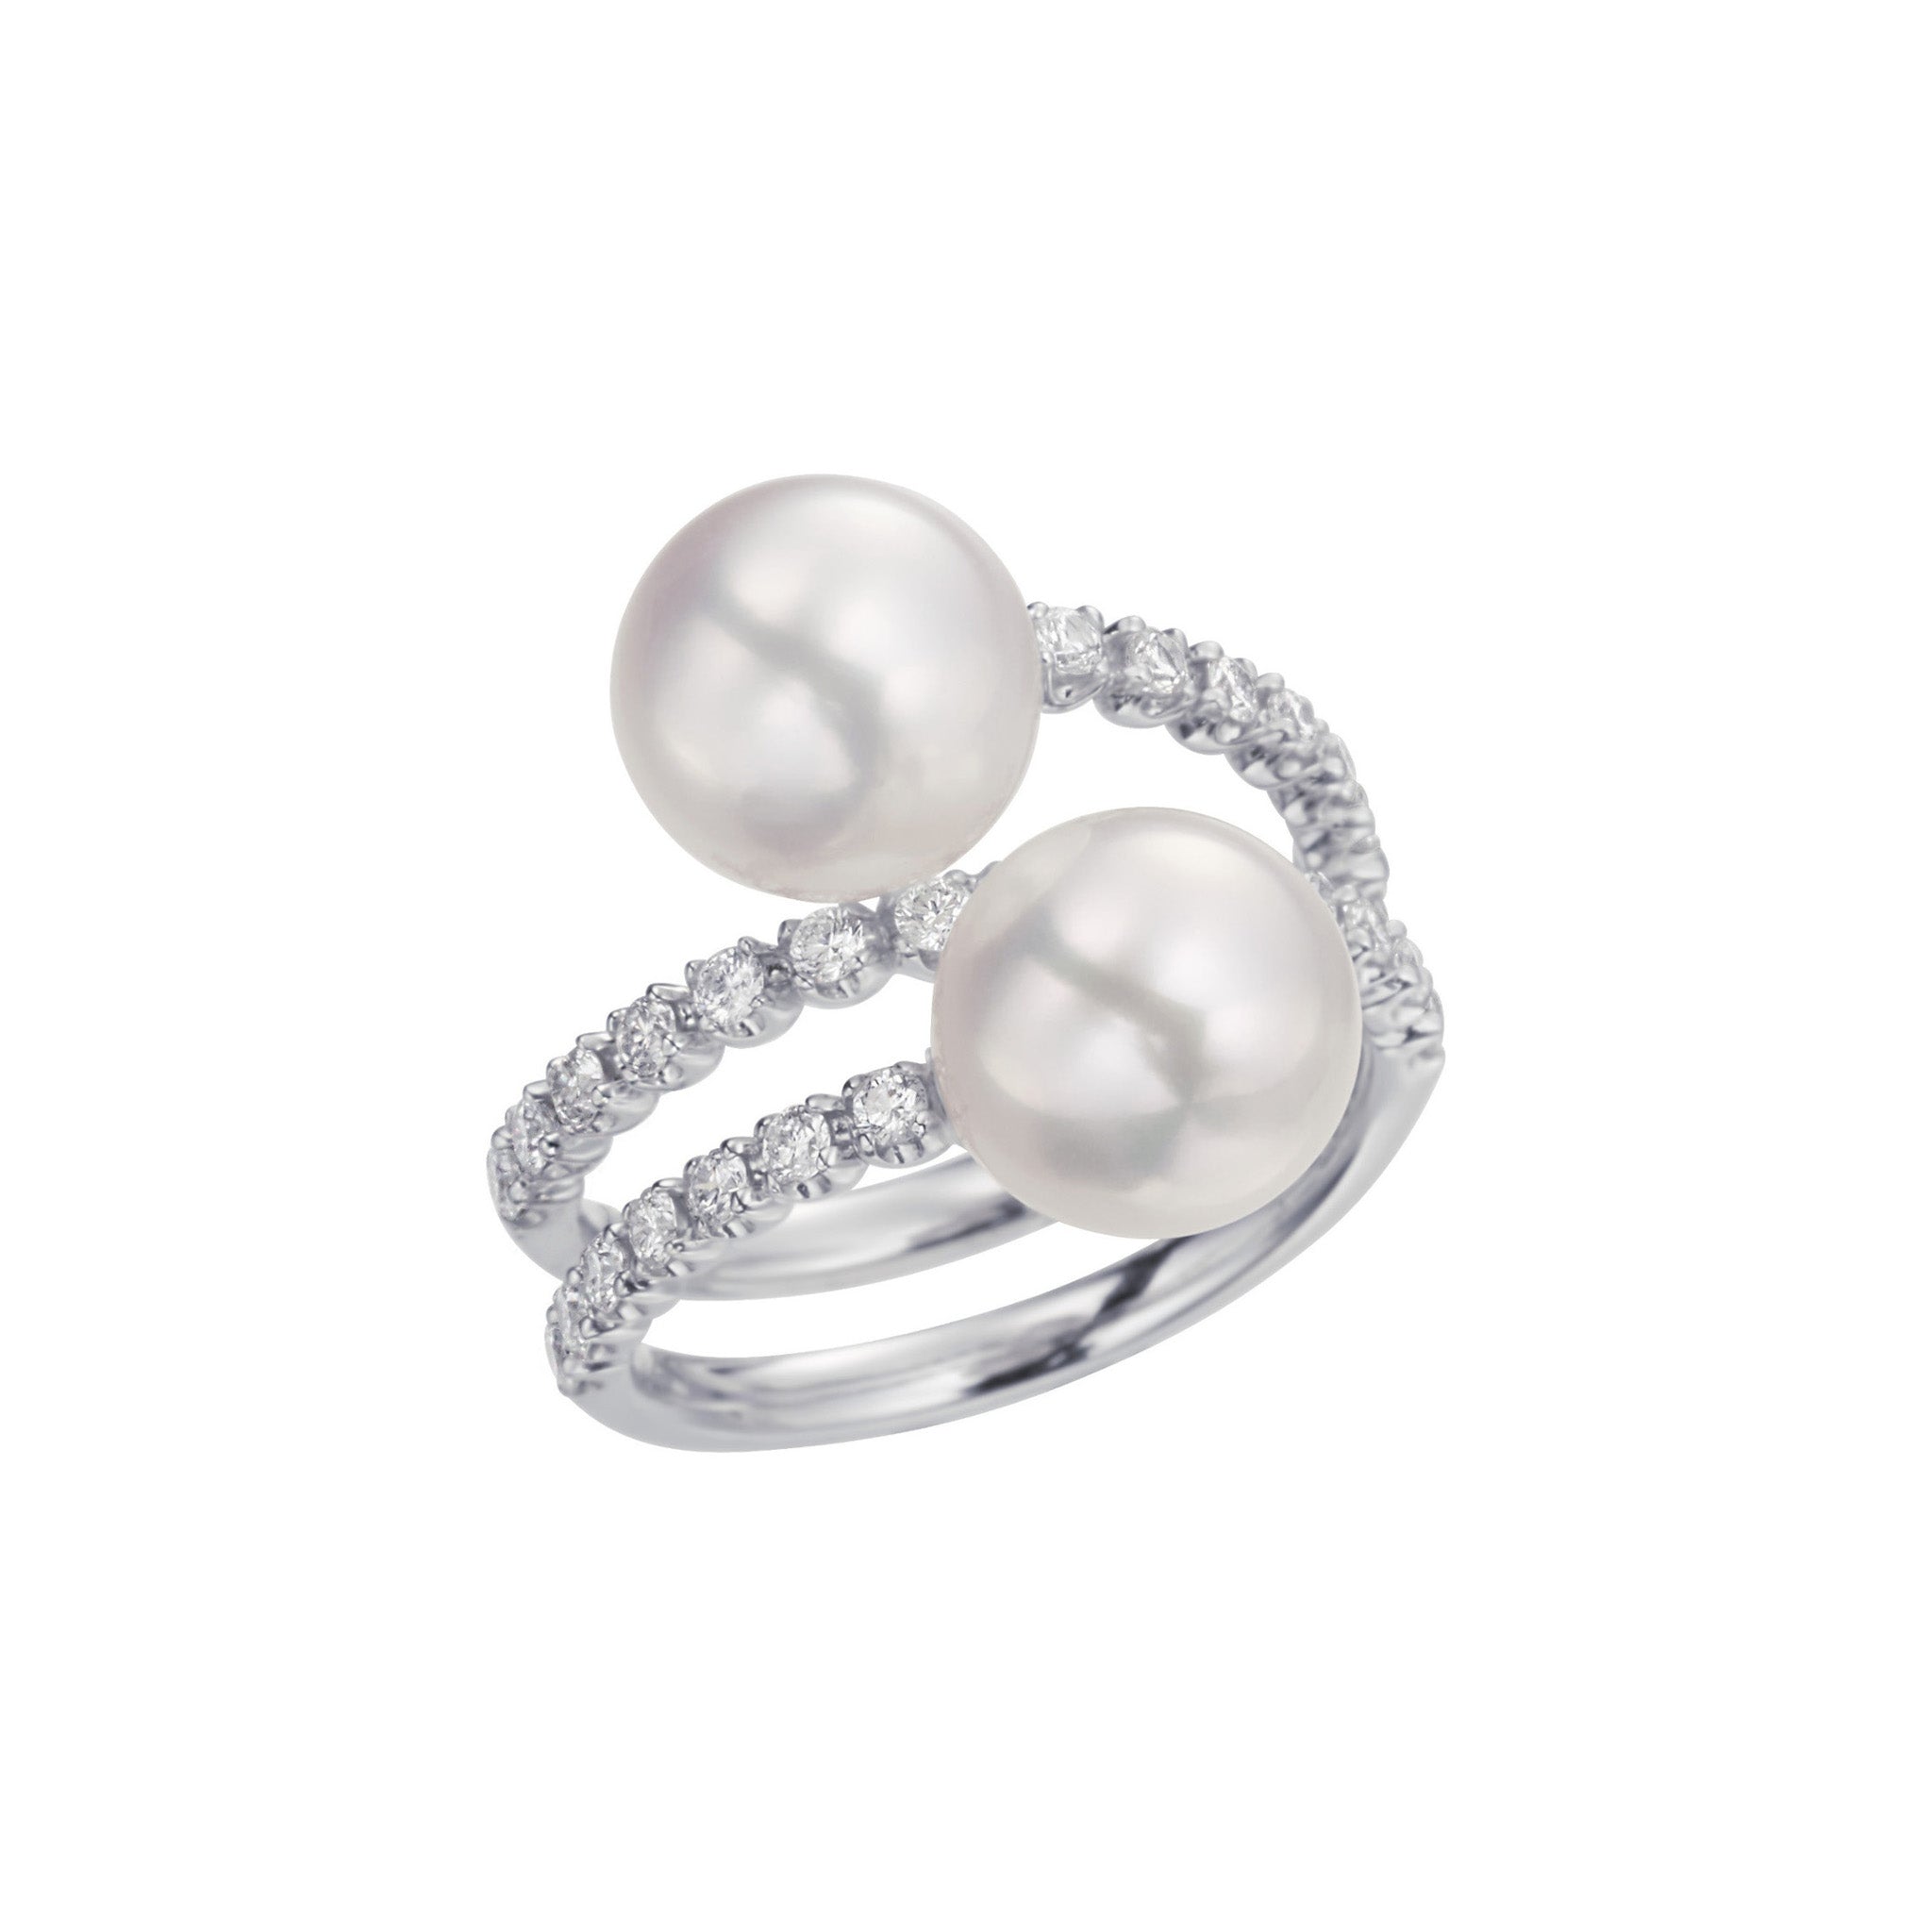 Diamond and South Sea Pearl Ring